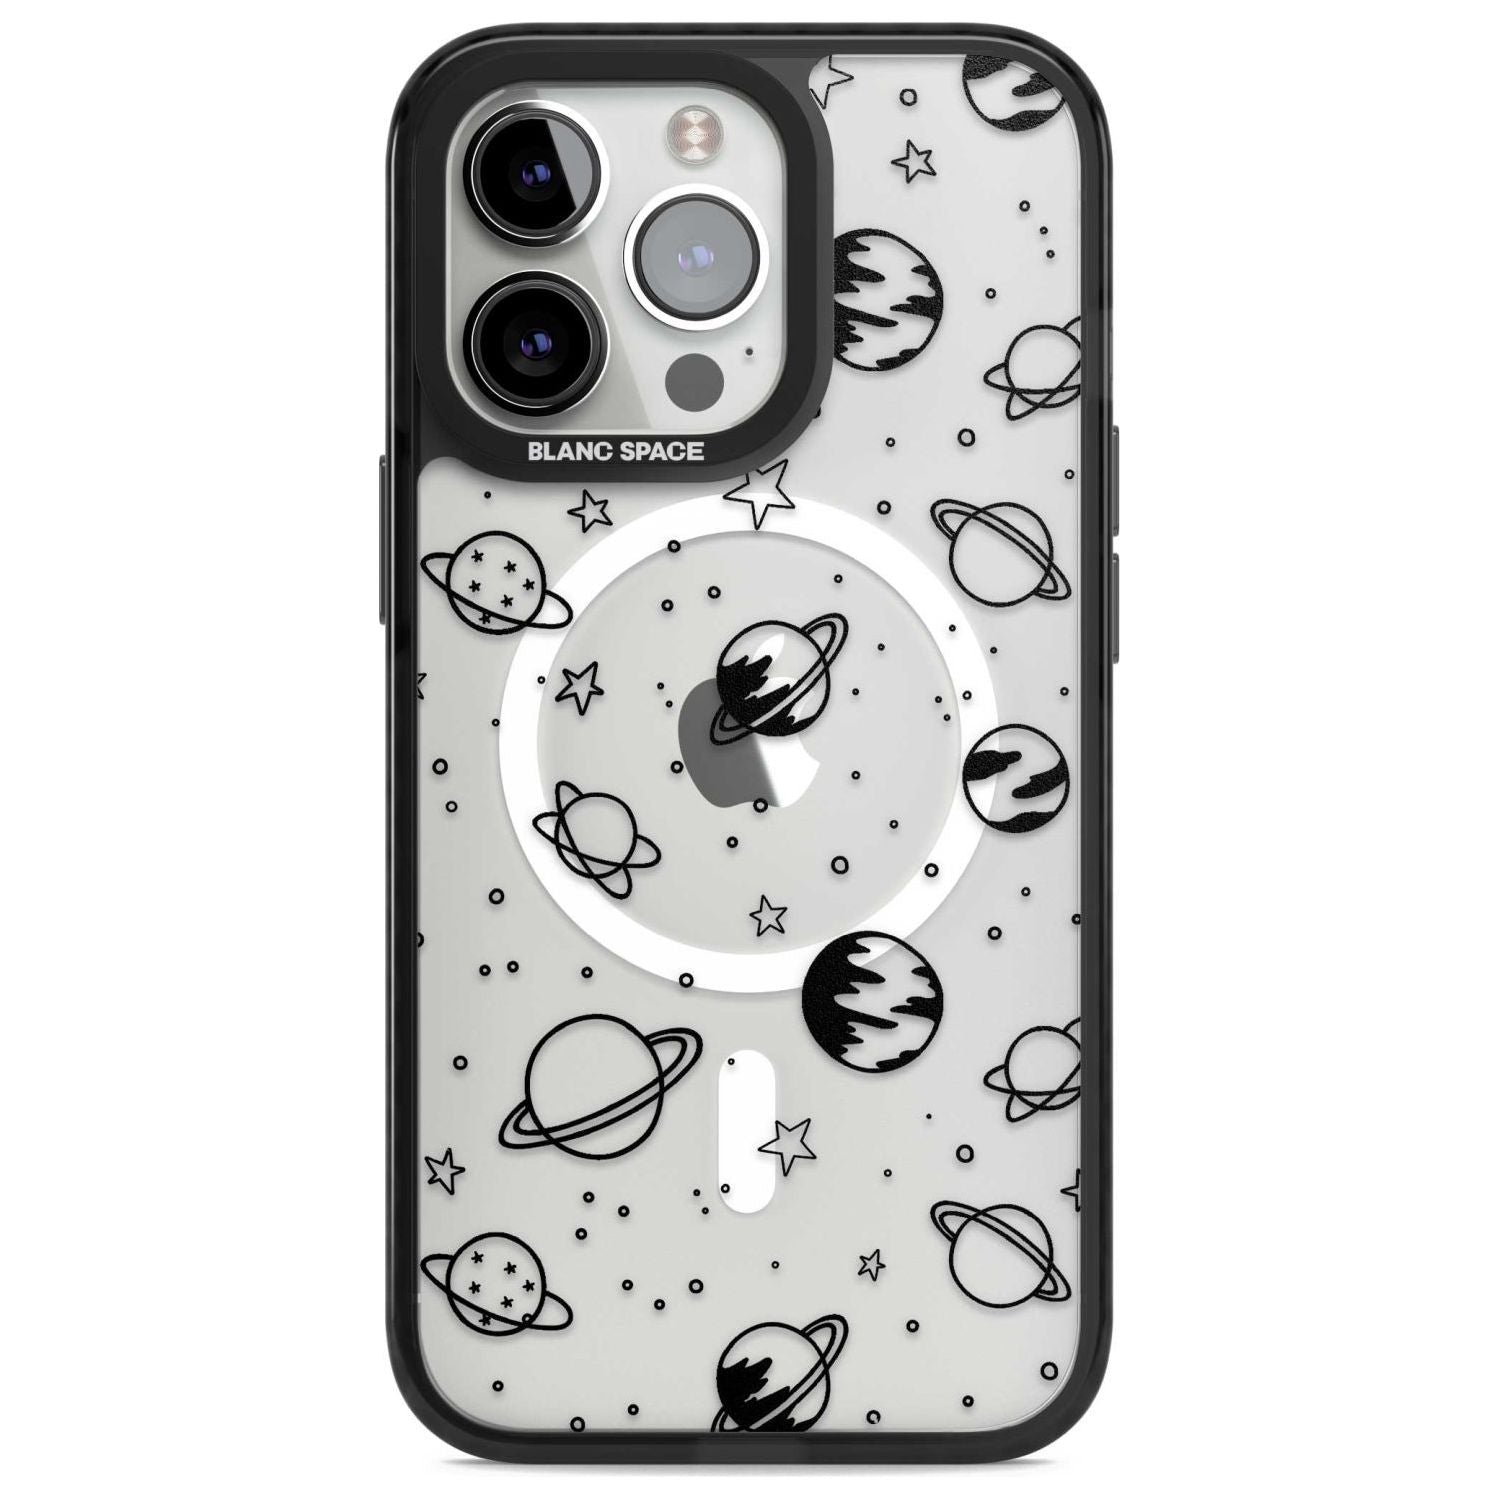 Cosmic Outer Space Design Black on Clear Phone Case iPhone 15 Pro Max / Magsafe Black Impact Case,iPhone 15 Pro / Magsafe Black Impact Case,iPhone 14 Pro Max / Magsafe Black Impact Case,iPhone 14 Pro / Magsafe Black Impact Case,iPhone 13 Pro / Magsafe Black Impact Case Blanc Space